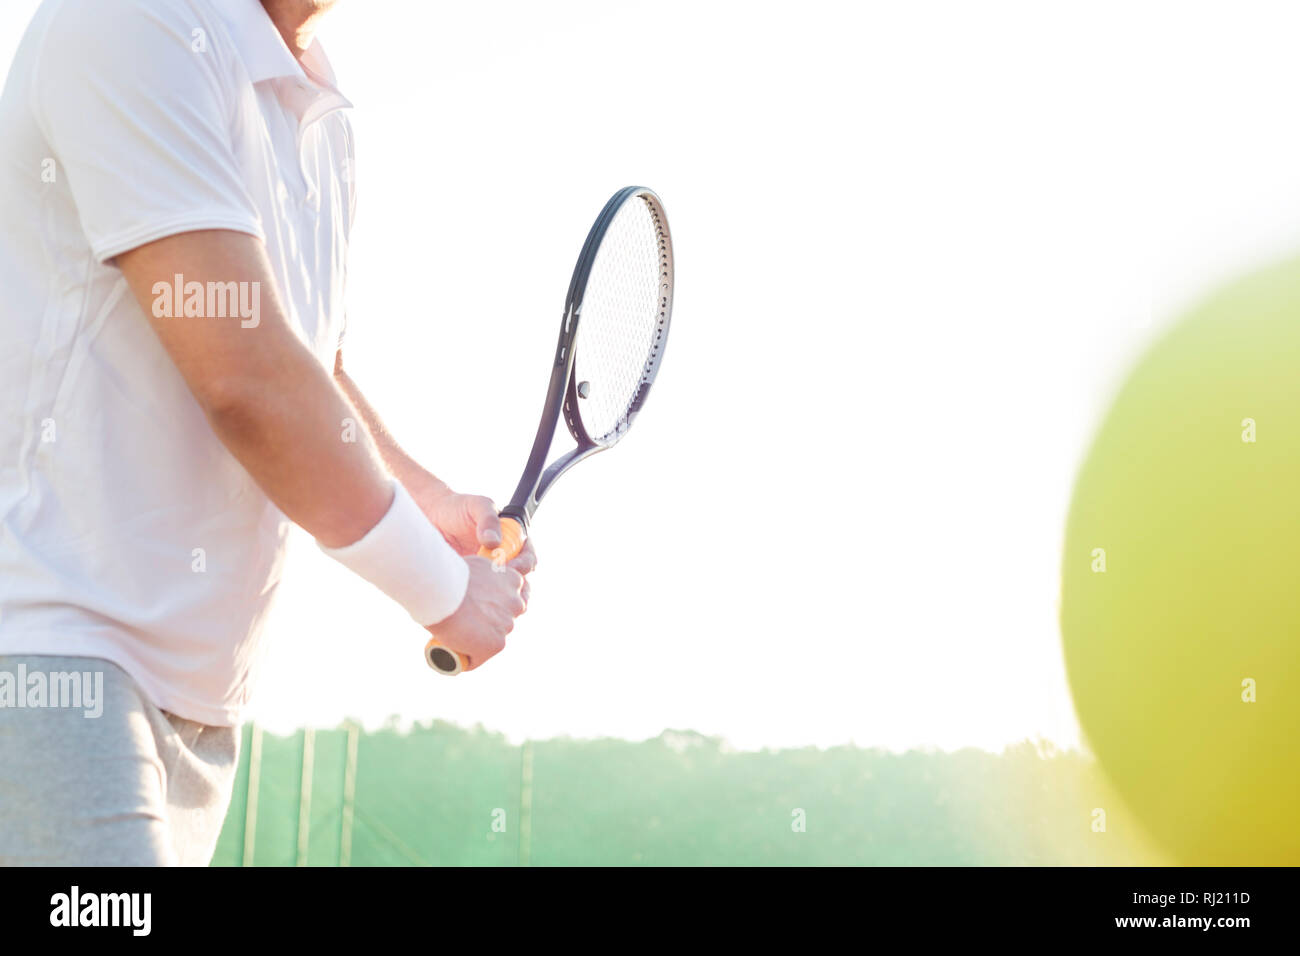 Midsection of mature man hitting tennis ball against clear sky Stock Photo